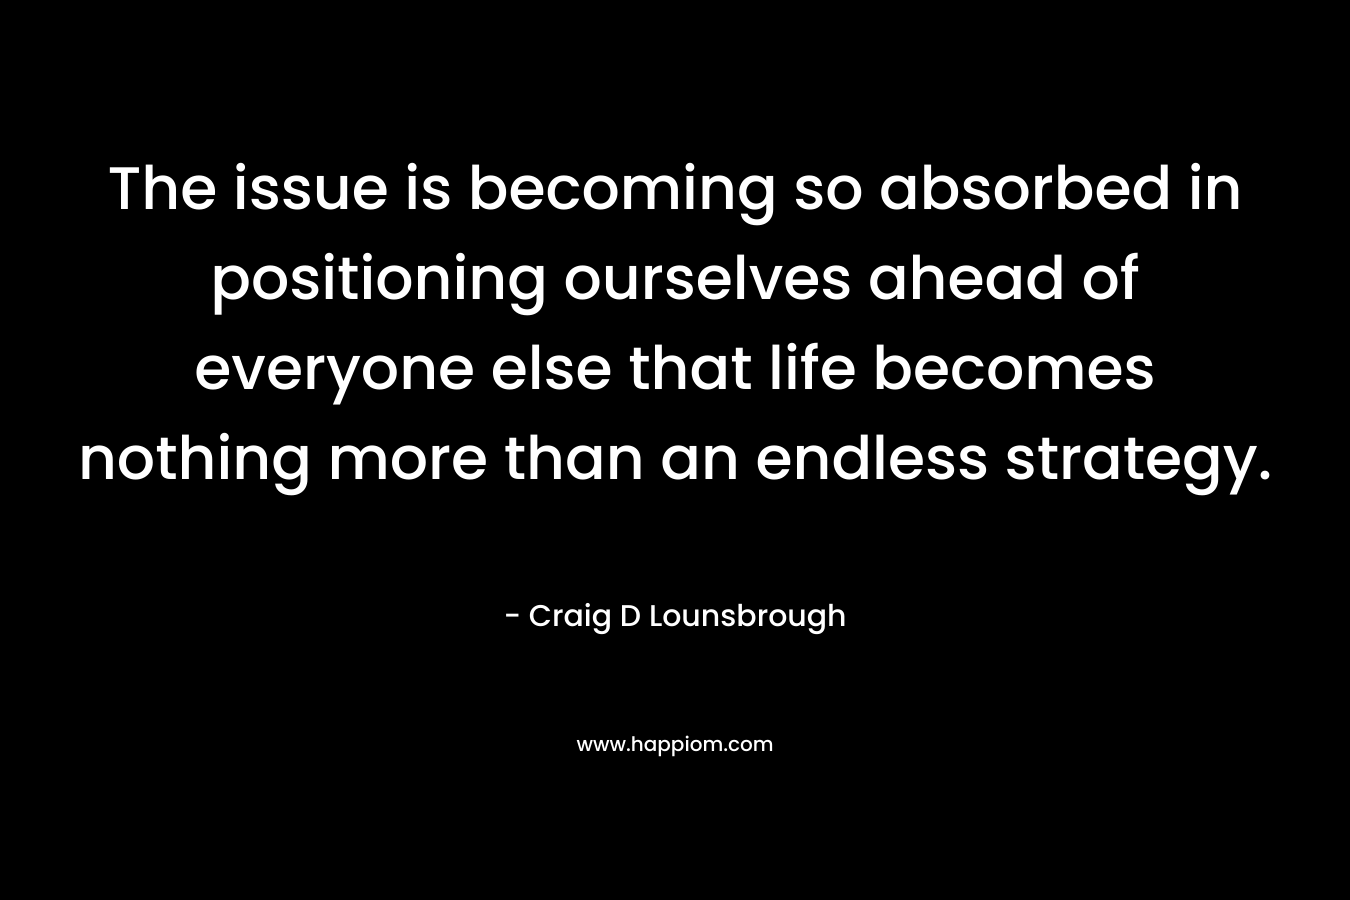 The issue is becoming so absorbed in positioning ourselves ahead of everyone else that life becomes nothing more than an endless strategy. – Craig D Lounsbrough